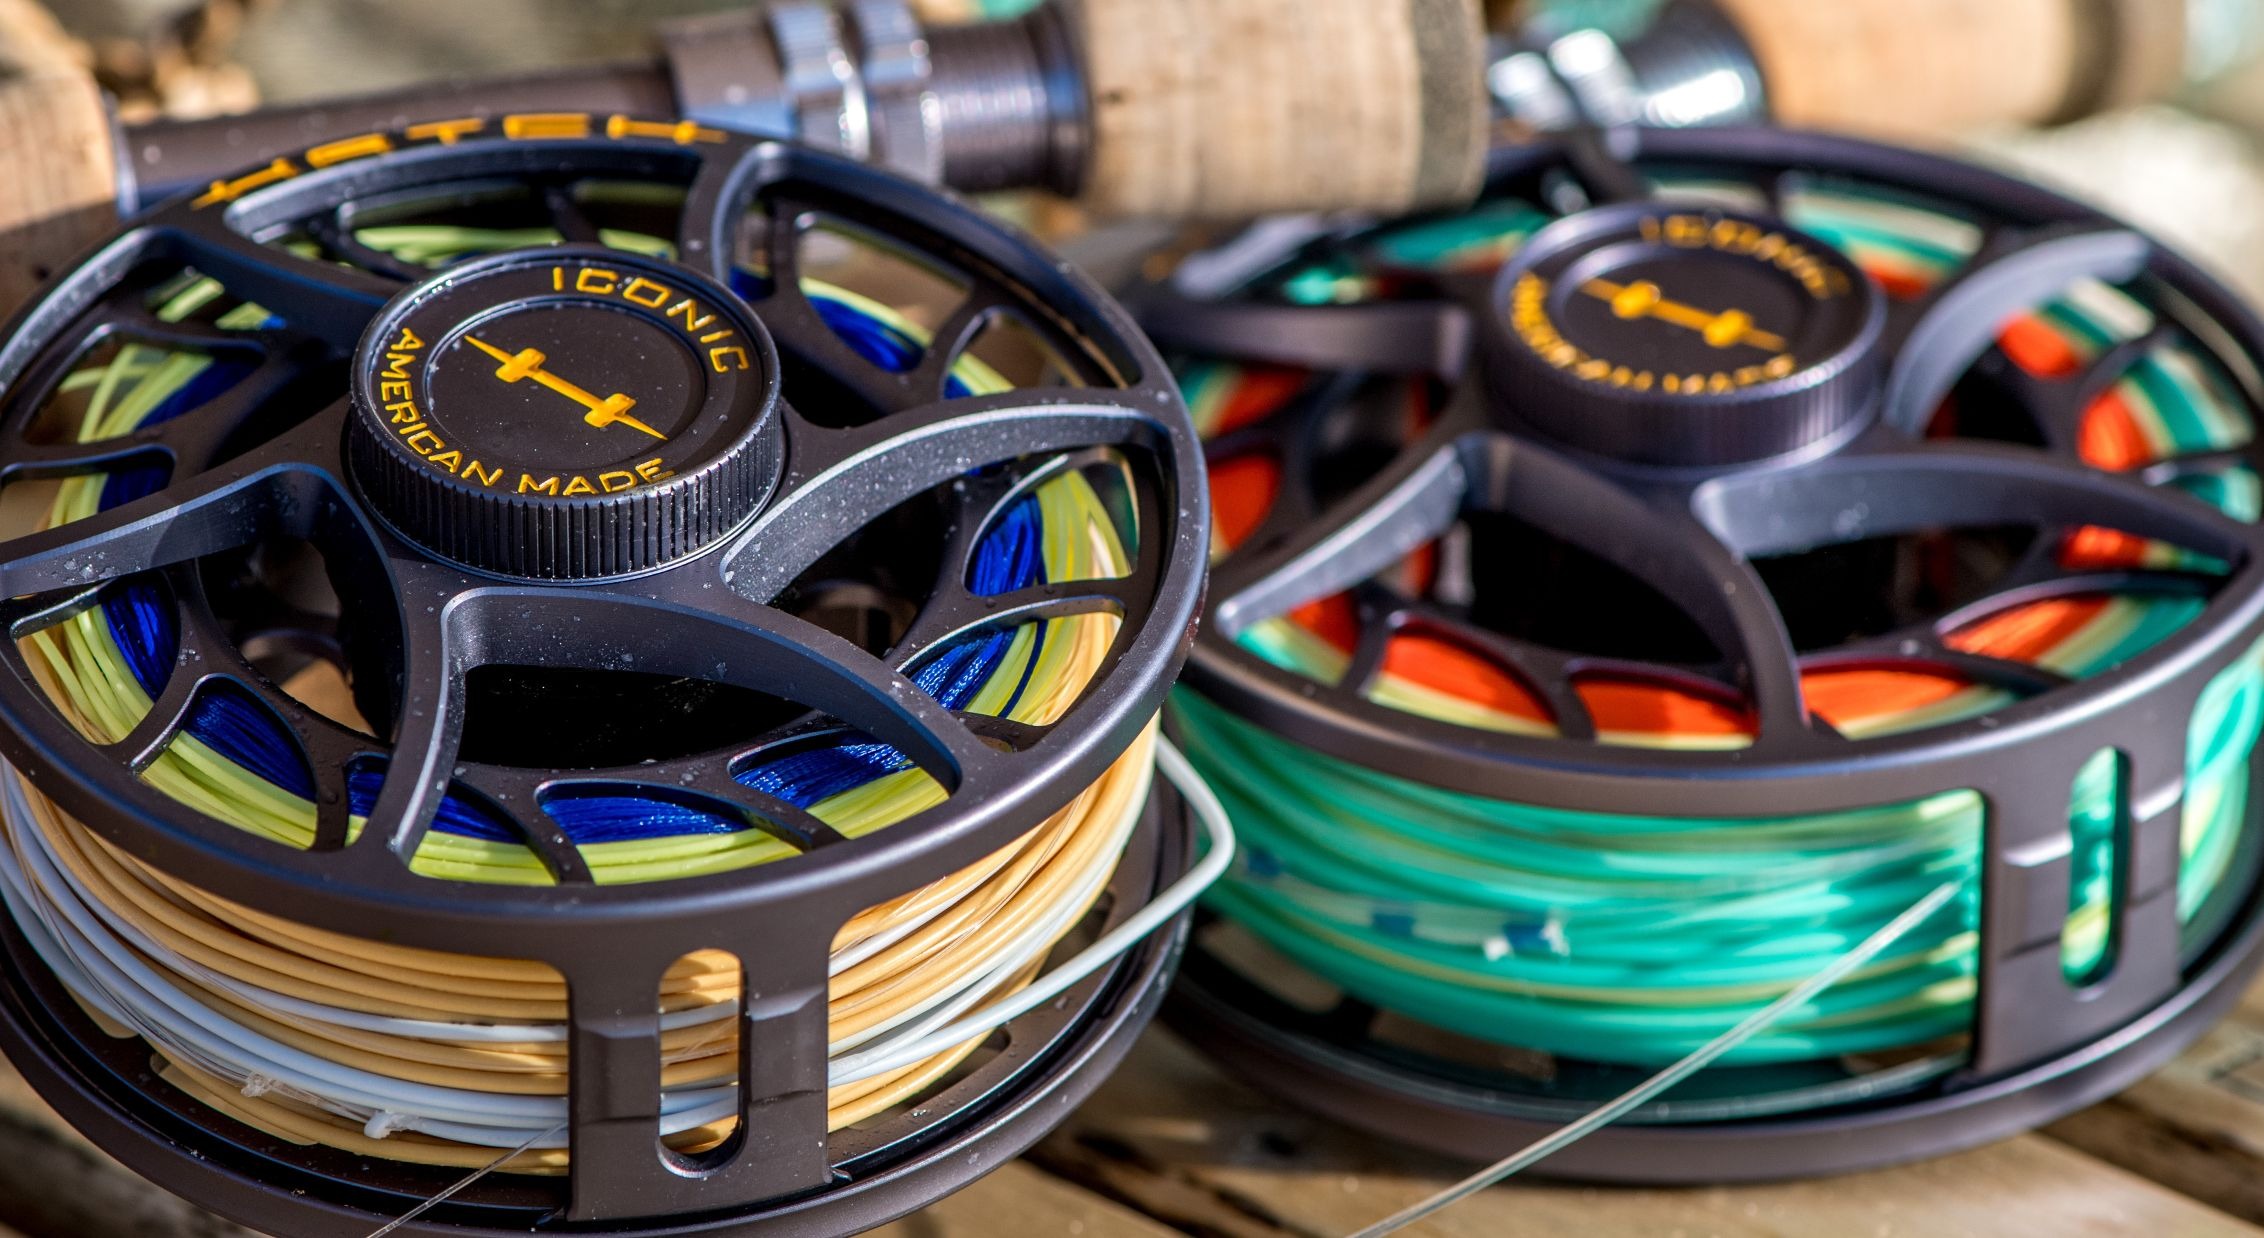 Ross Animas Reels  Pacific Fly Fishers